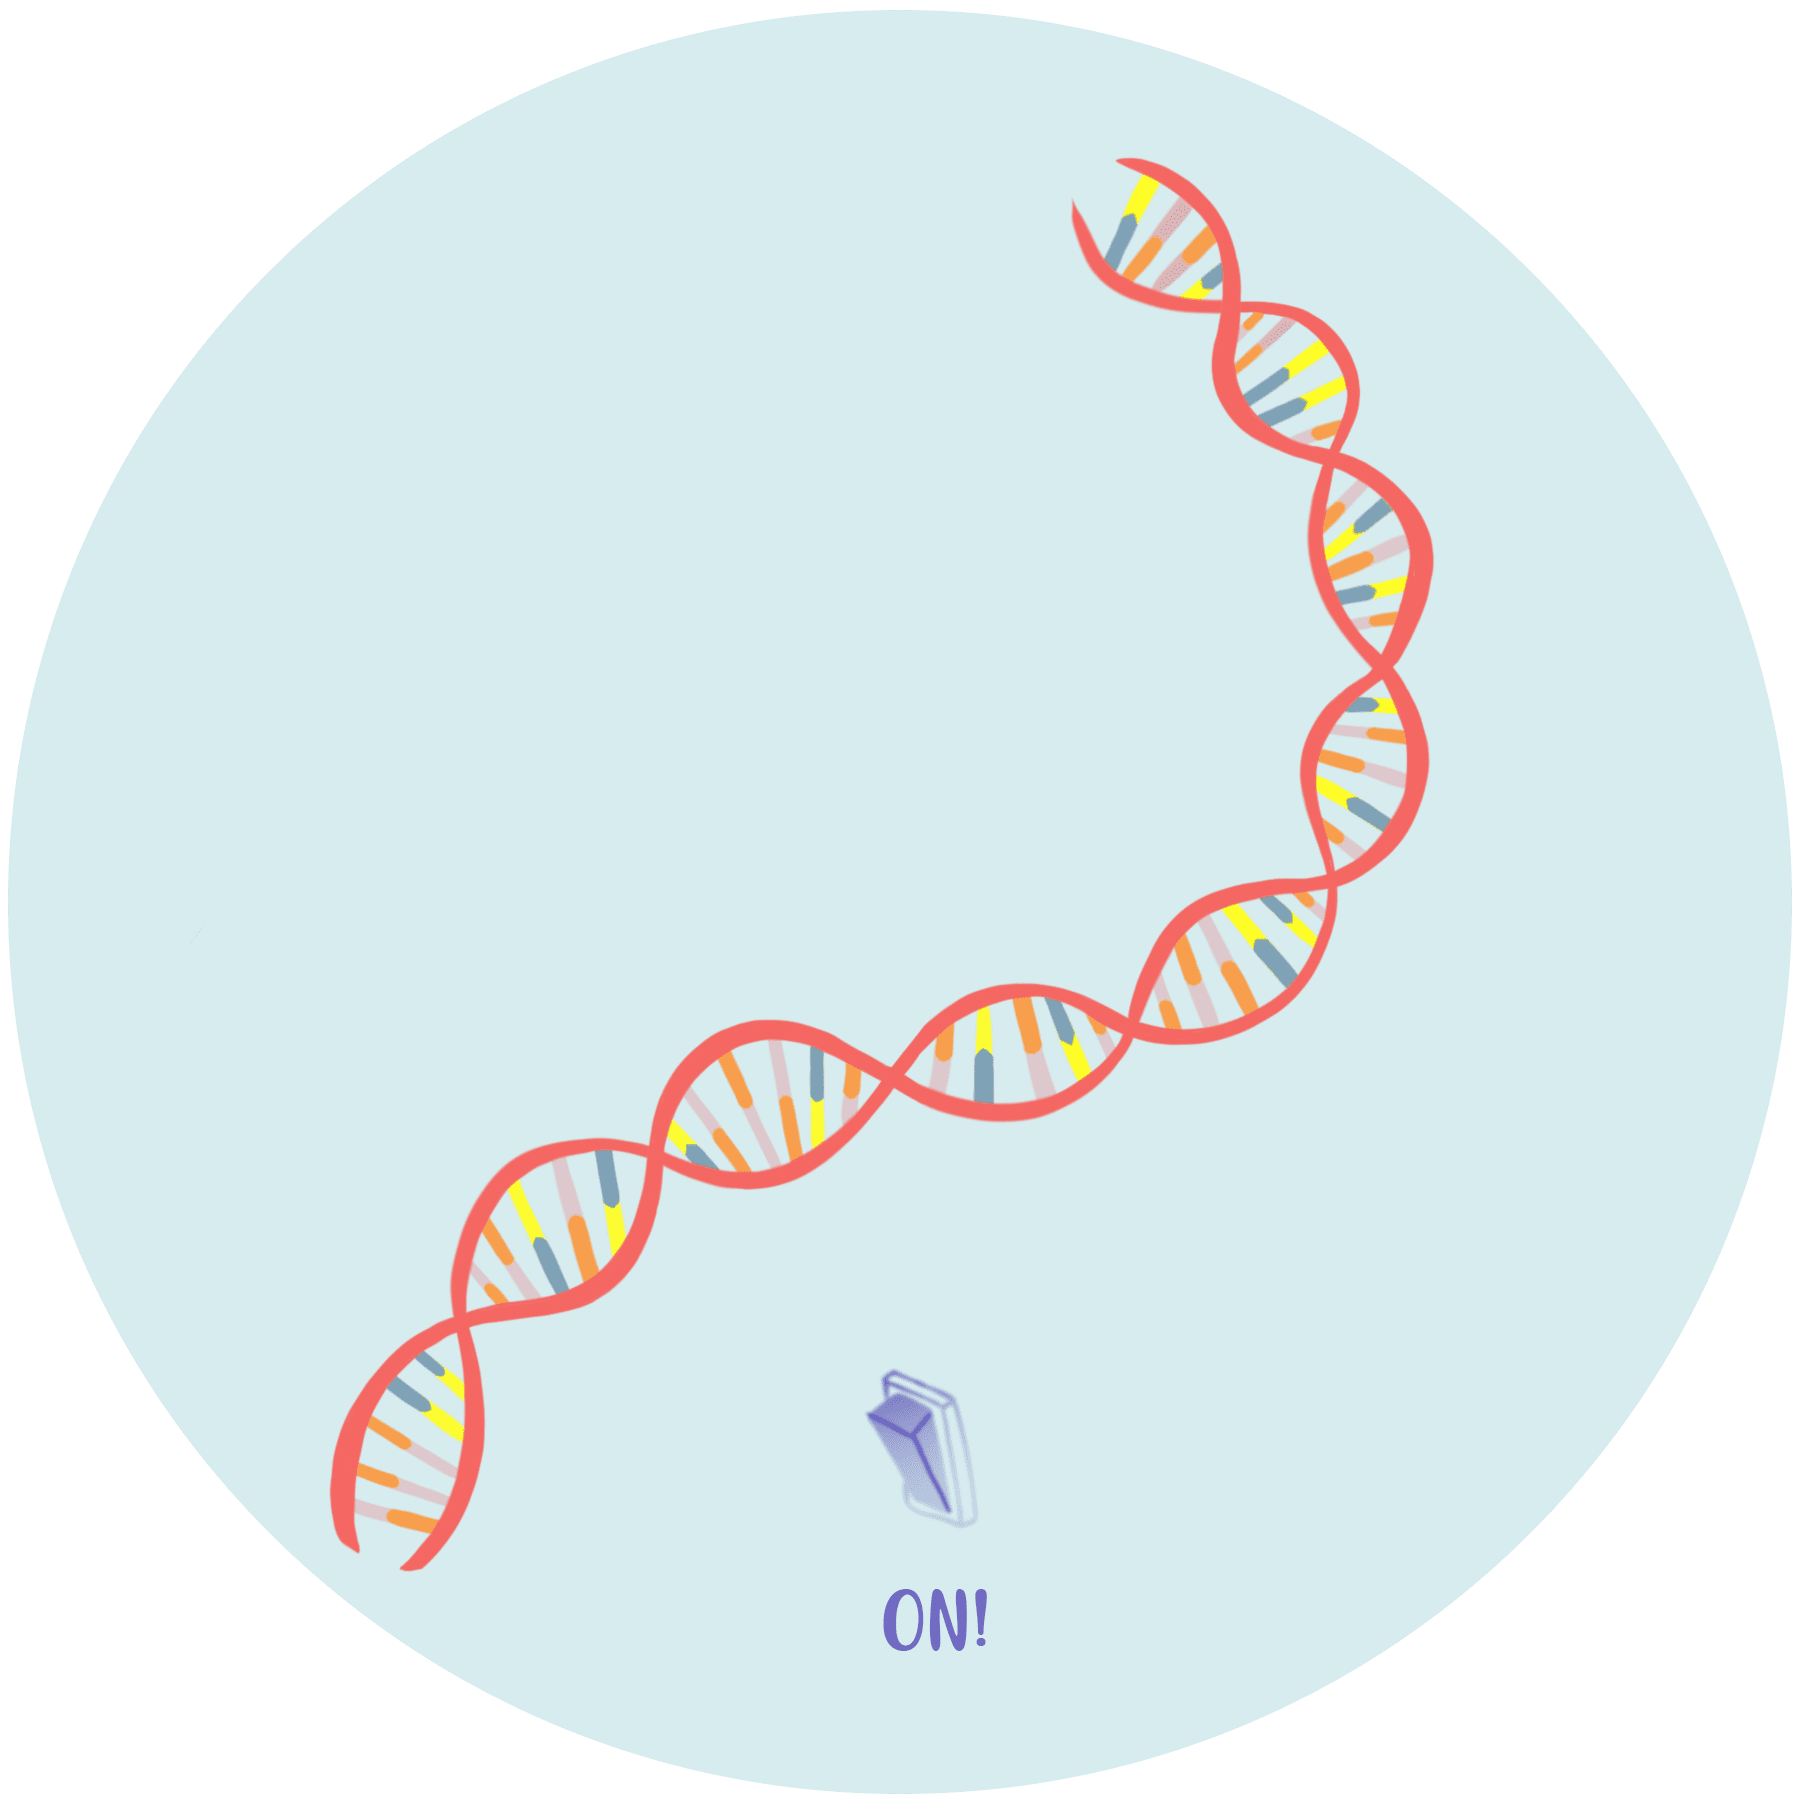 Illustration of DNA with a light switch that says "ON!"